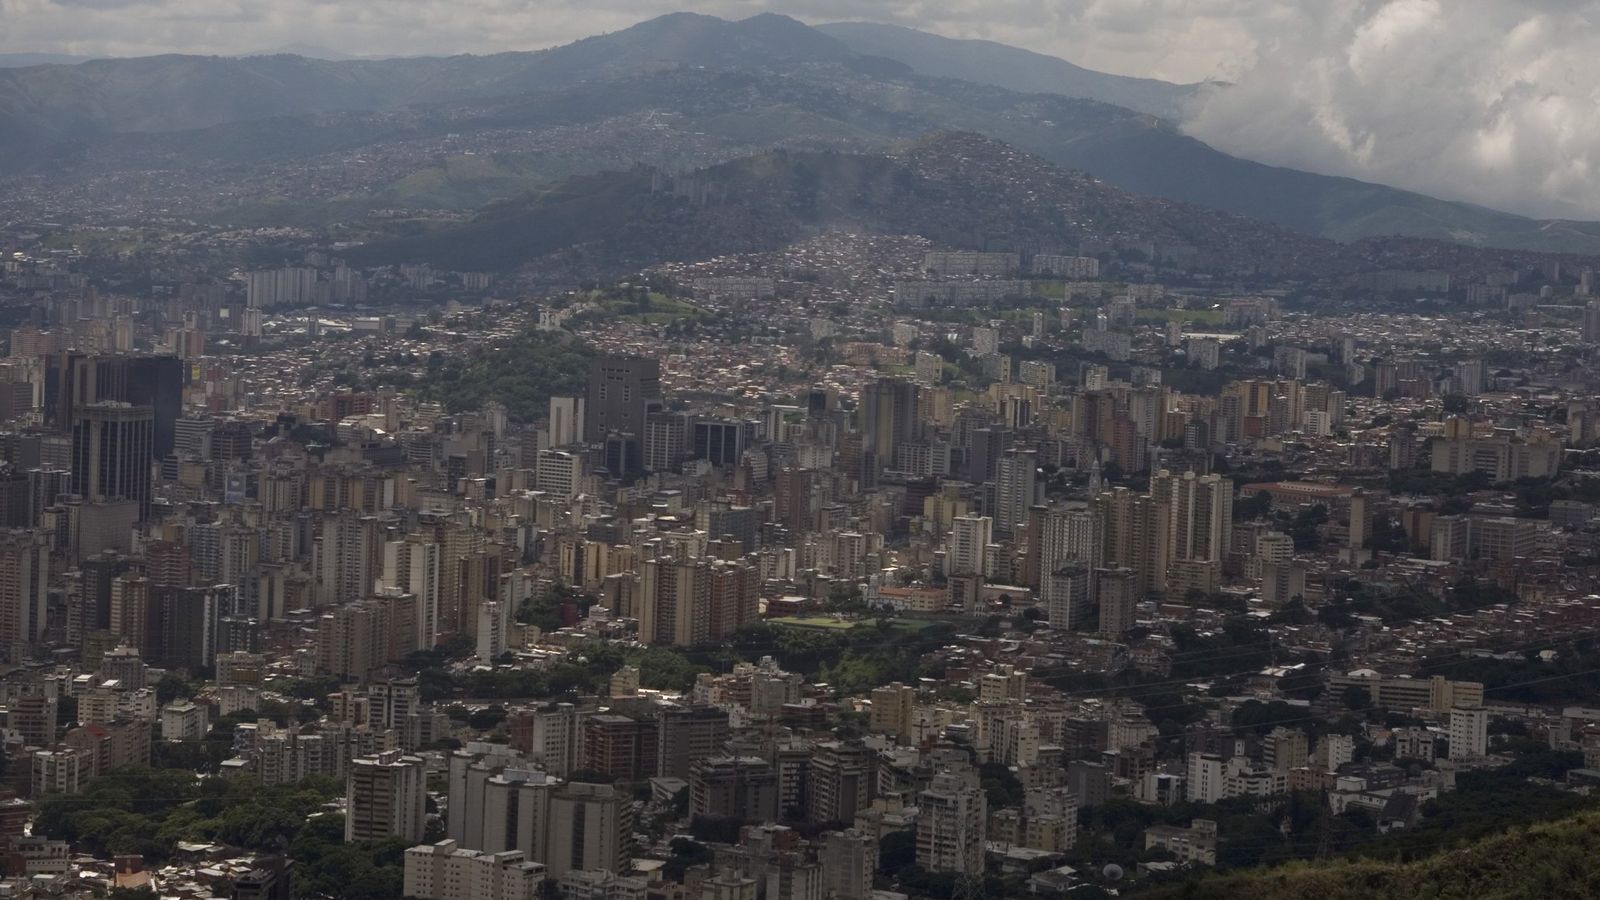 Dreaming about sex in Caracas